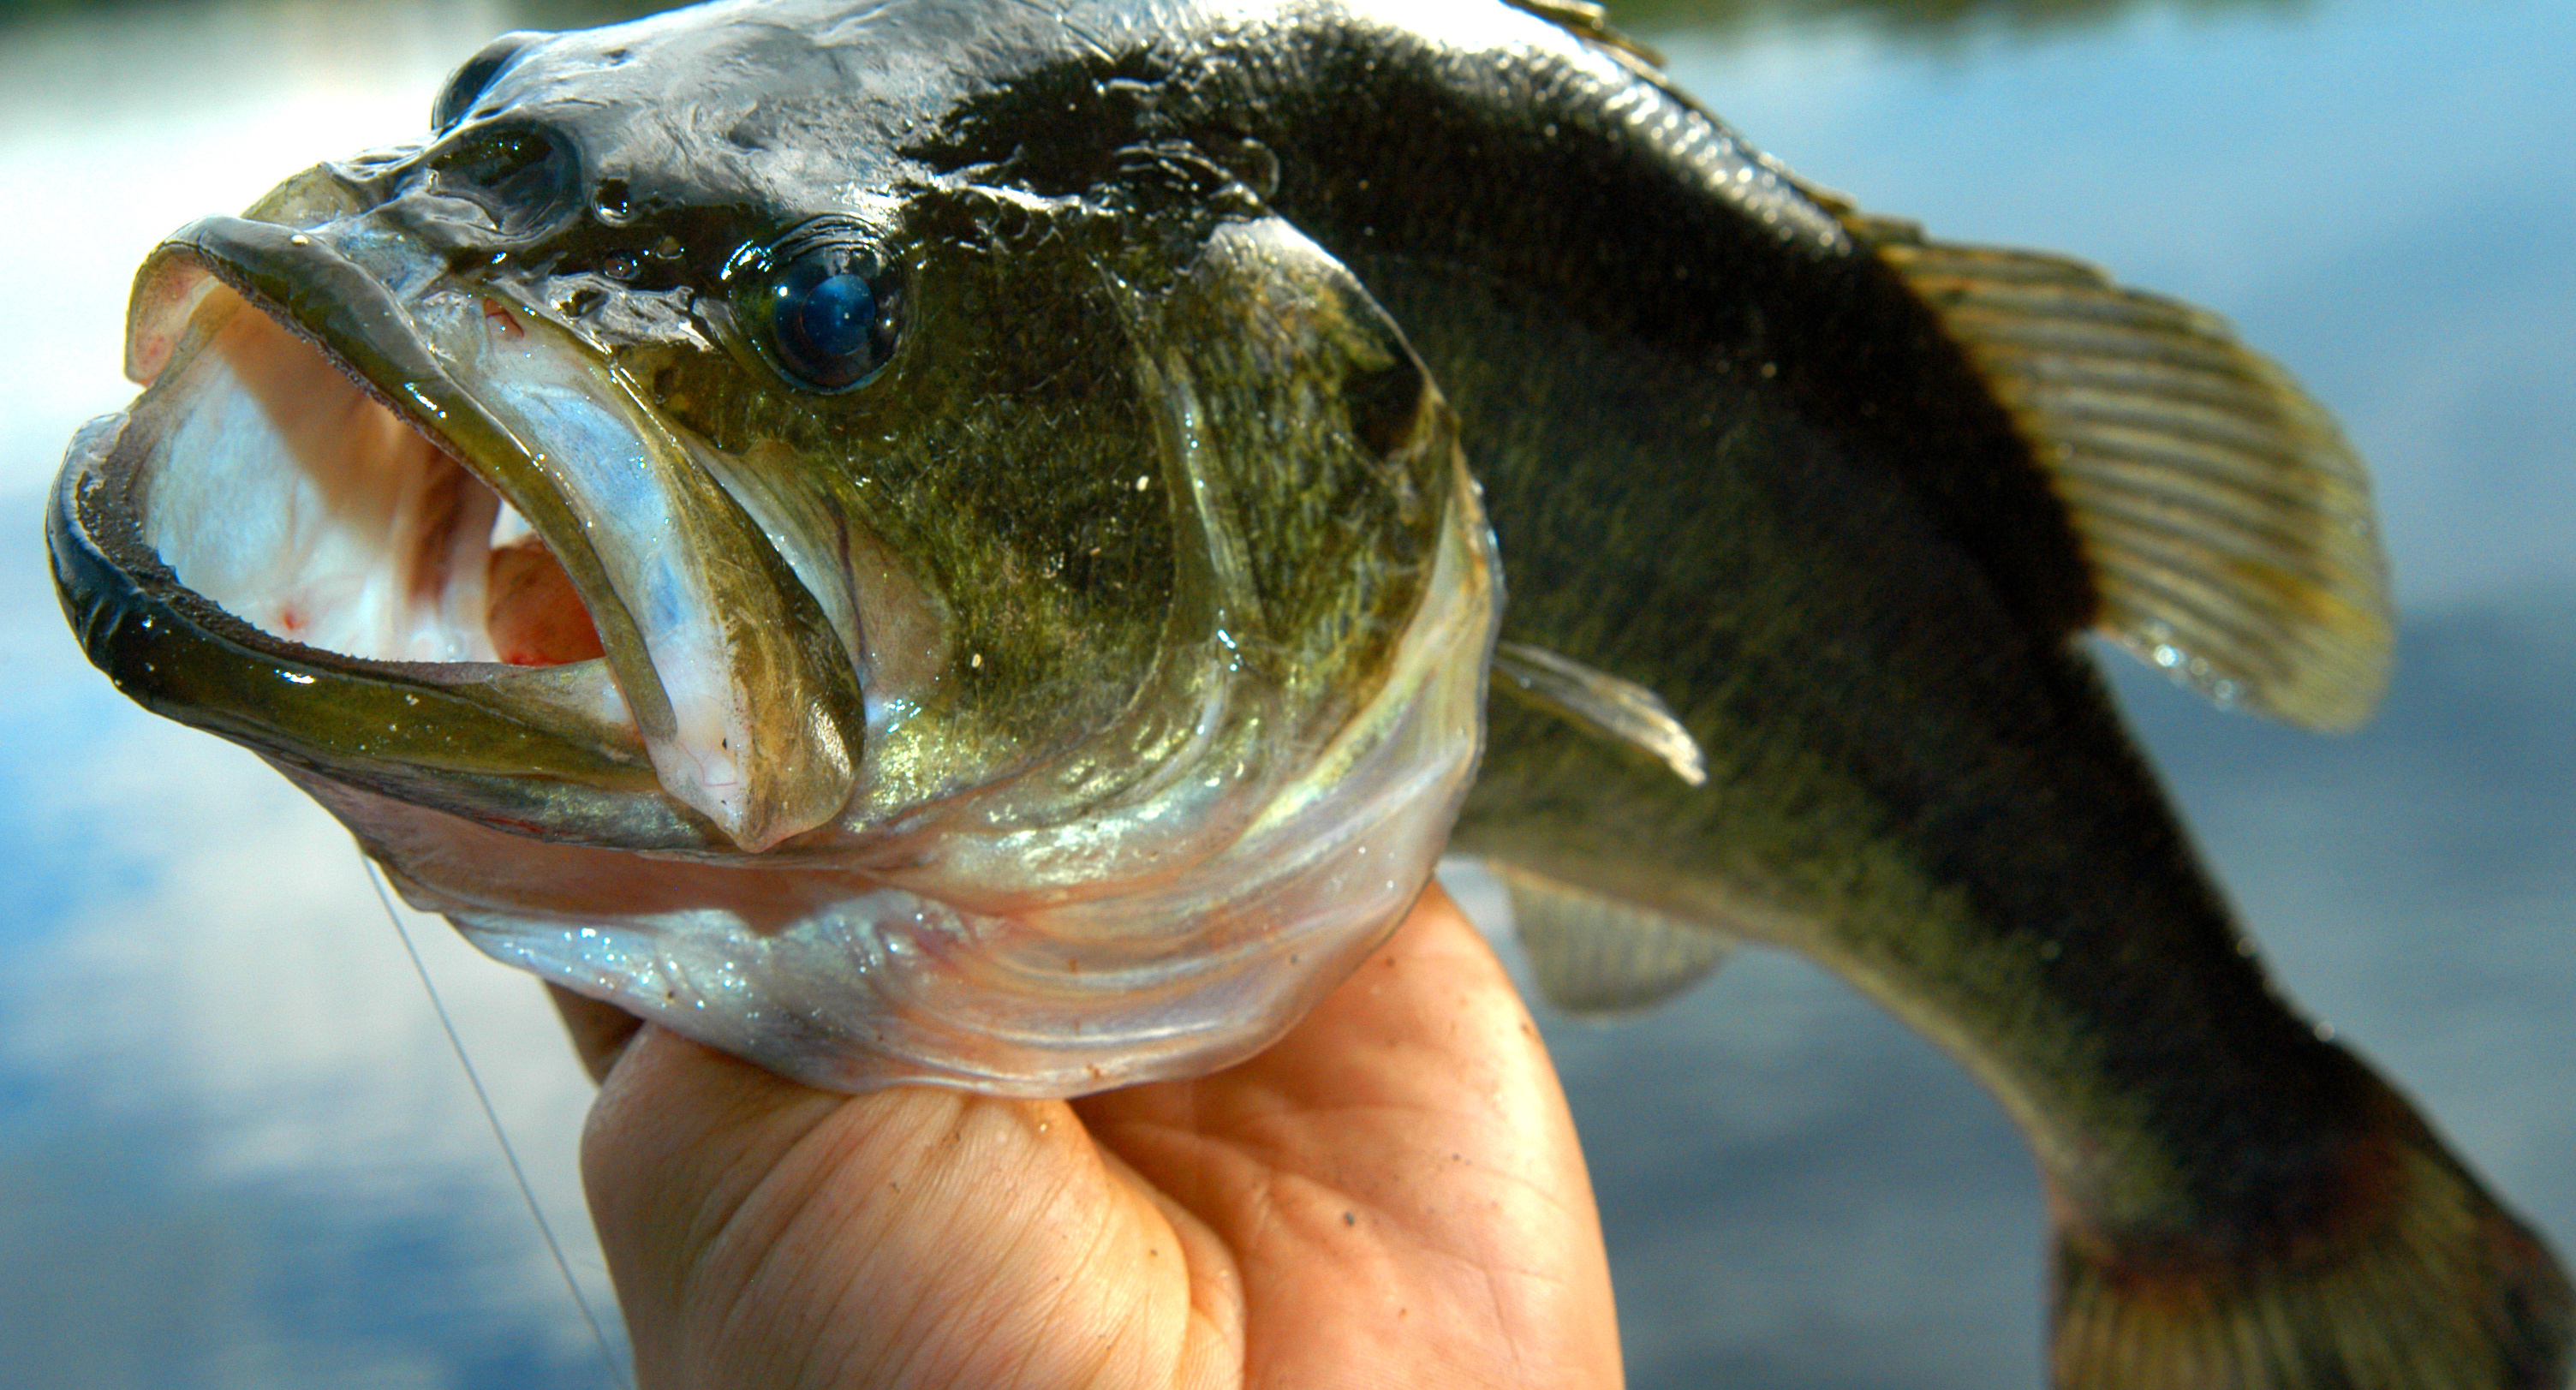 Largemouth bass are voracious eaters, prolific in lakes and rivers in the US, and the target of many anglers.